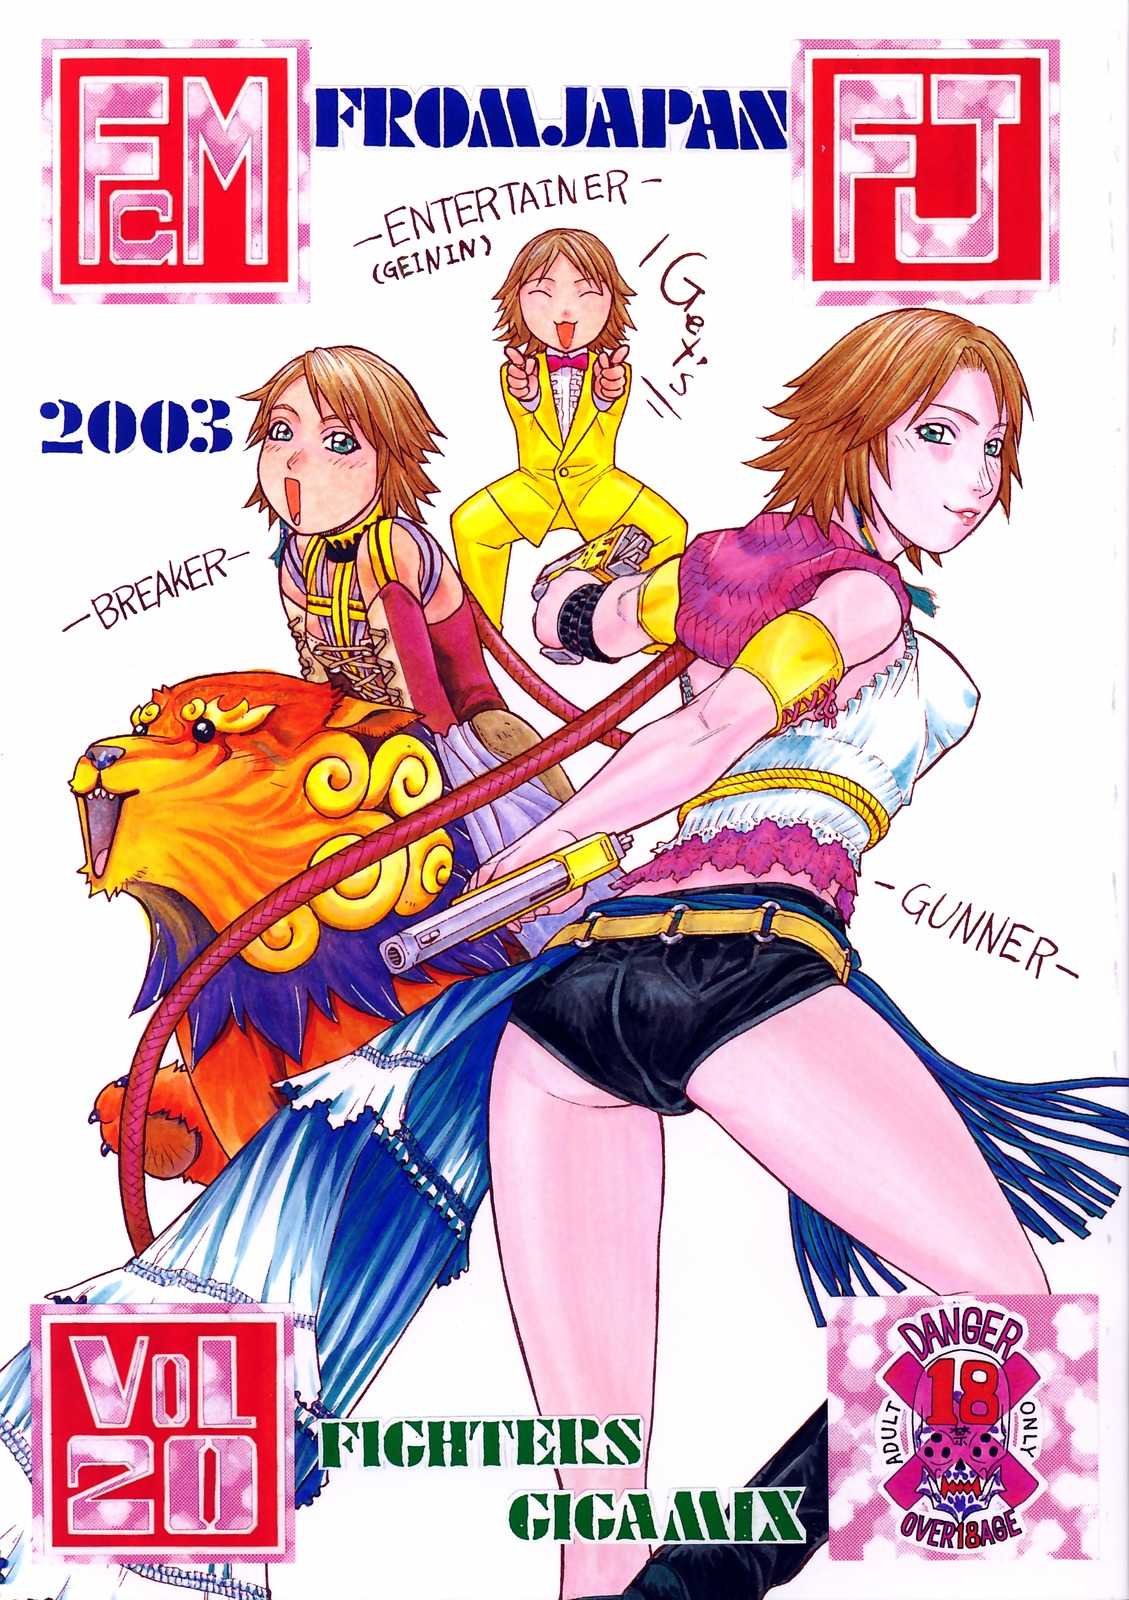 [From Japan] Fighters Gigamix Vol 20 (Final Fantasy) 